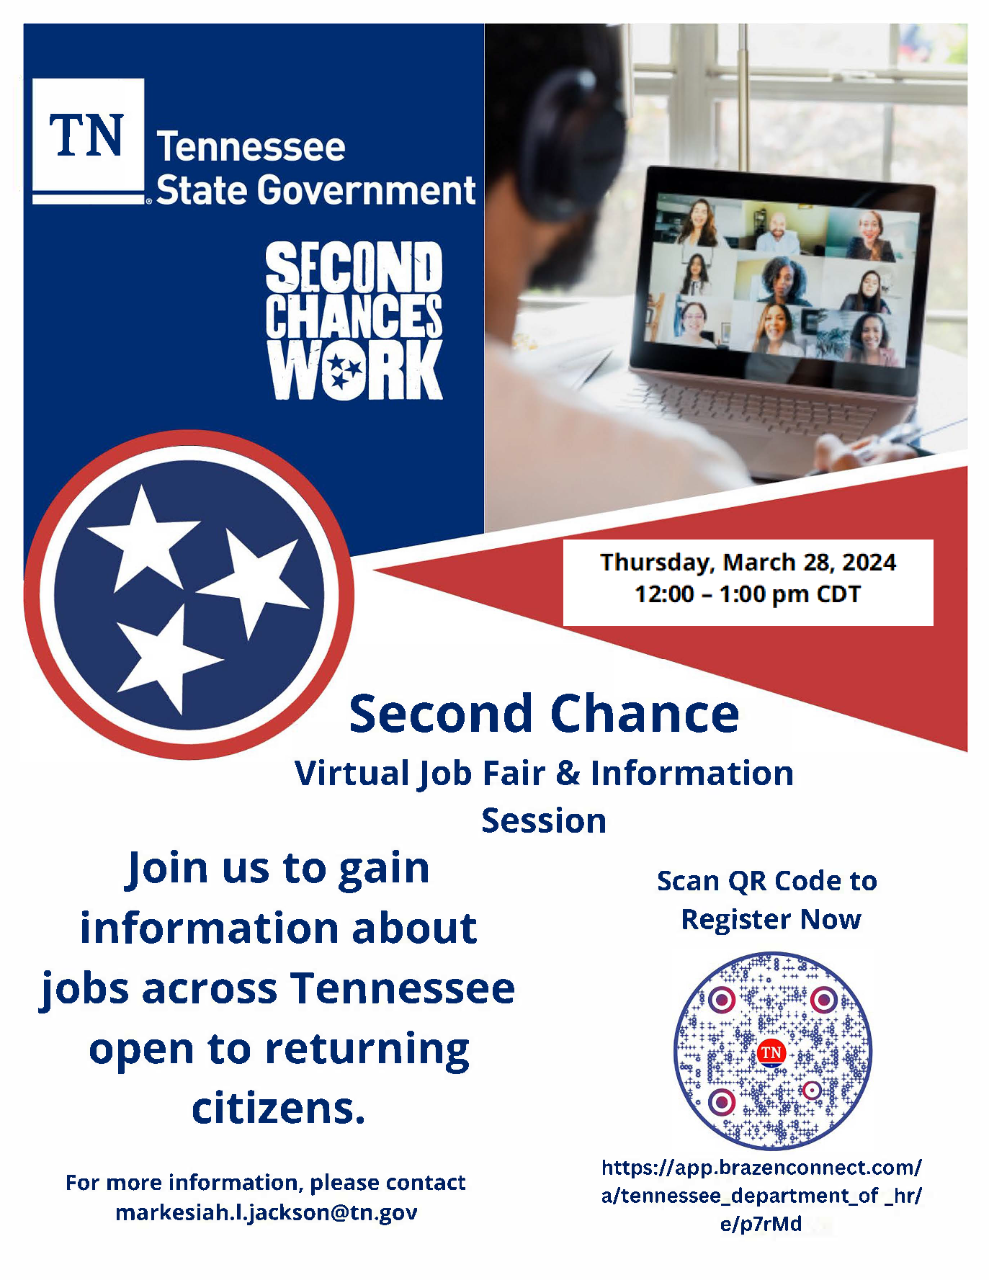 TN DOHR Second Chance Virtual Job Fair and Information Session 3/28/2024, from noon to 1 pm CDT